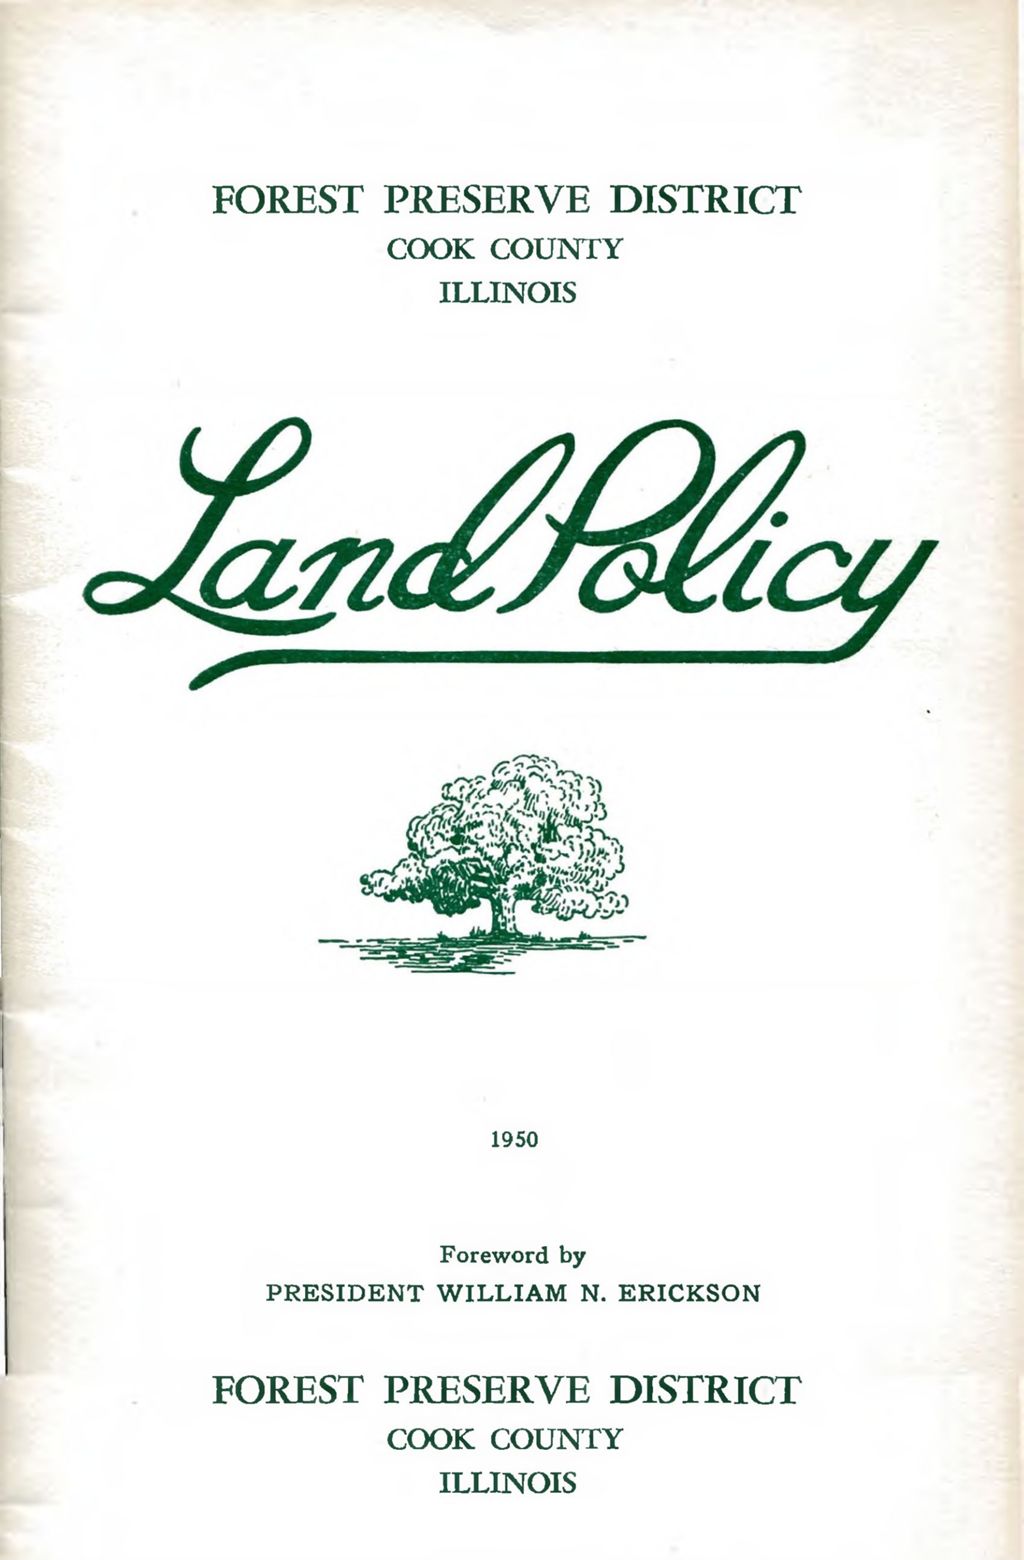 Miniature of Land Policy, Forest Preserve District of Cook County, 1950